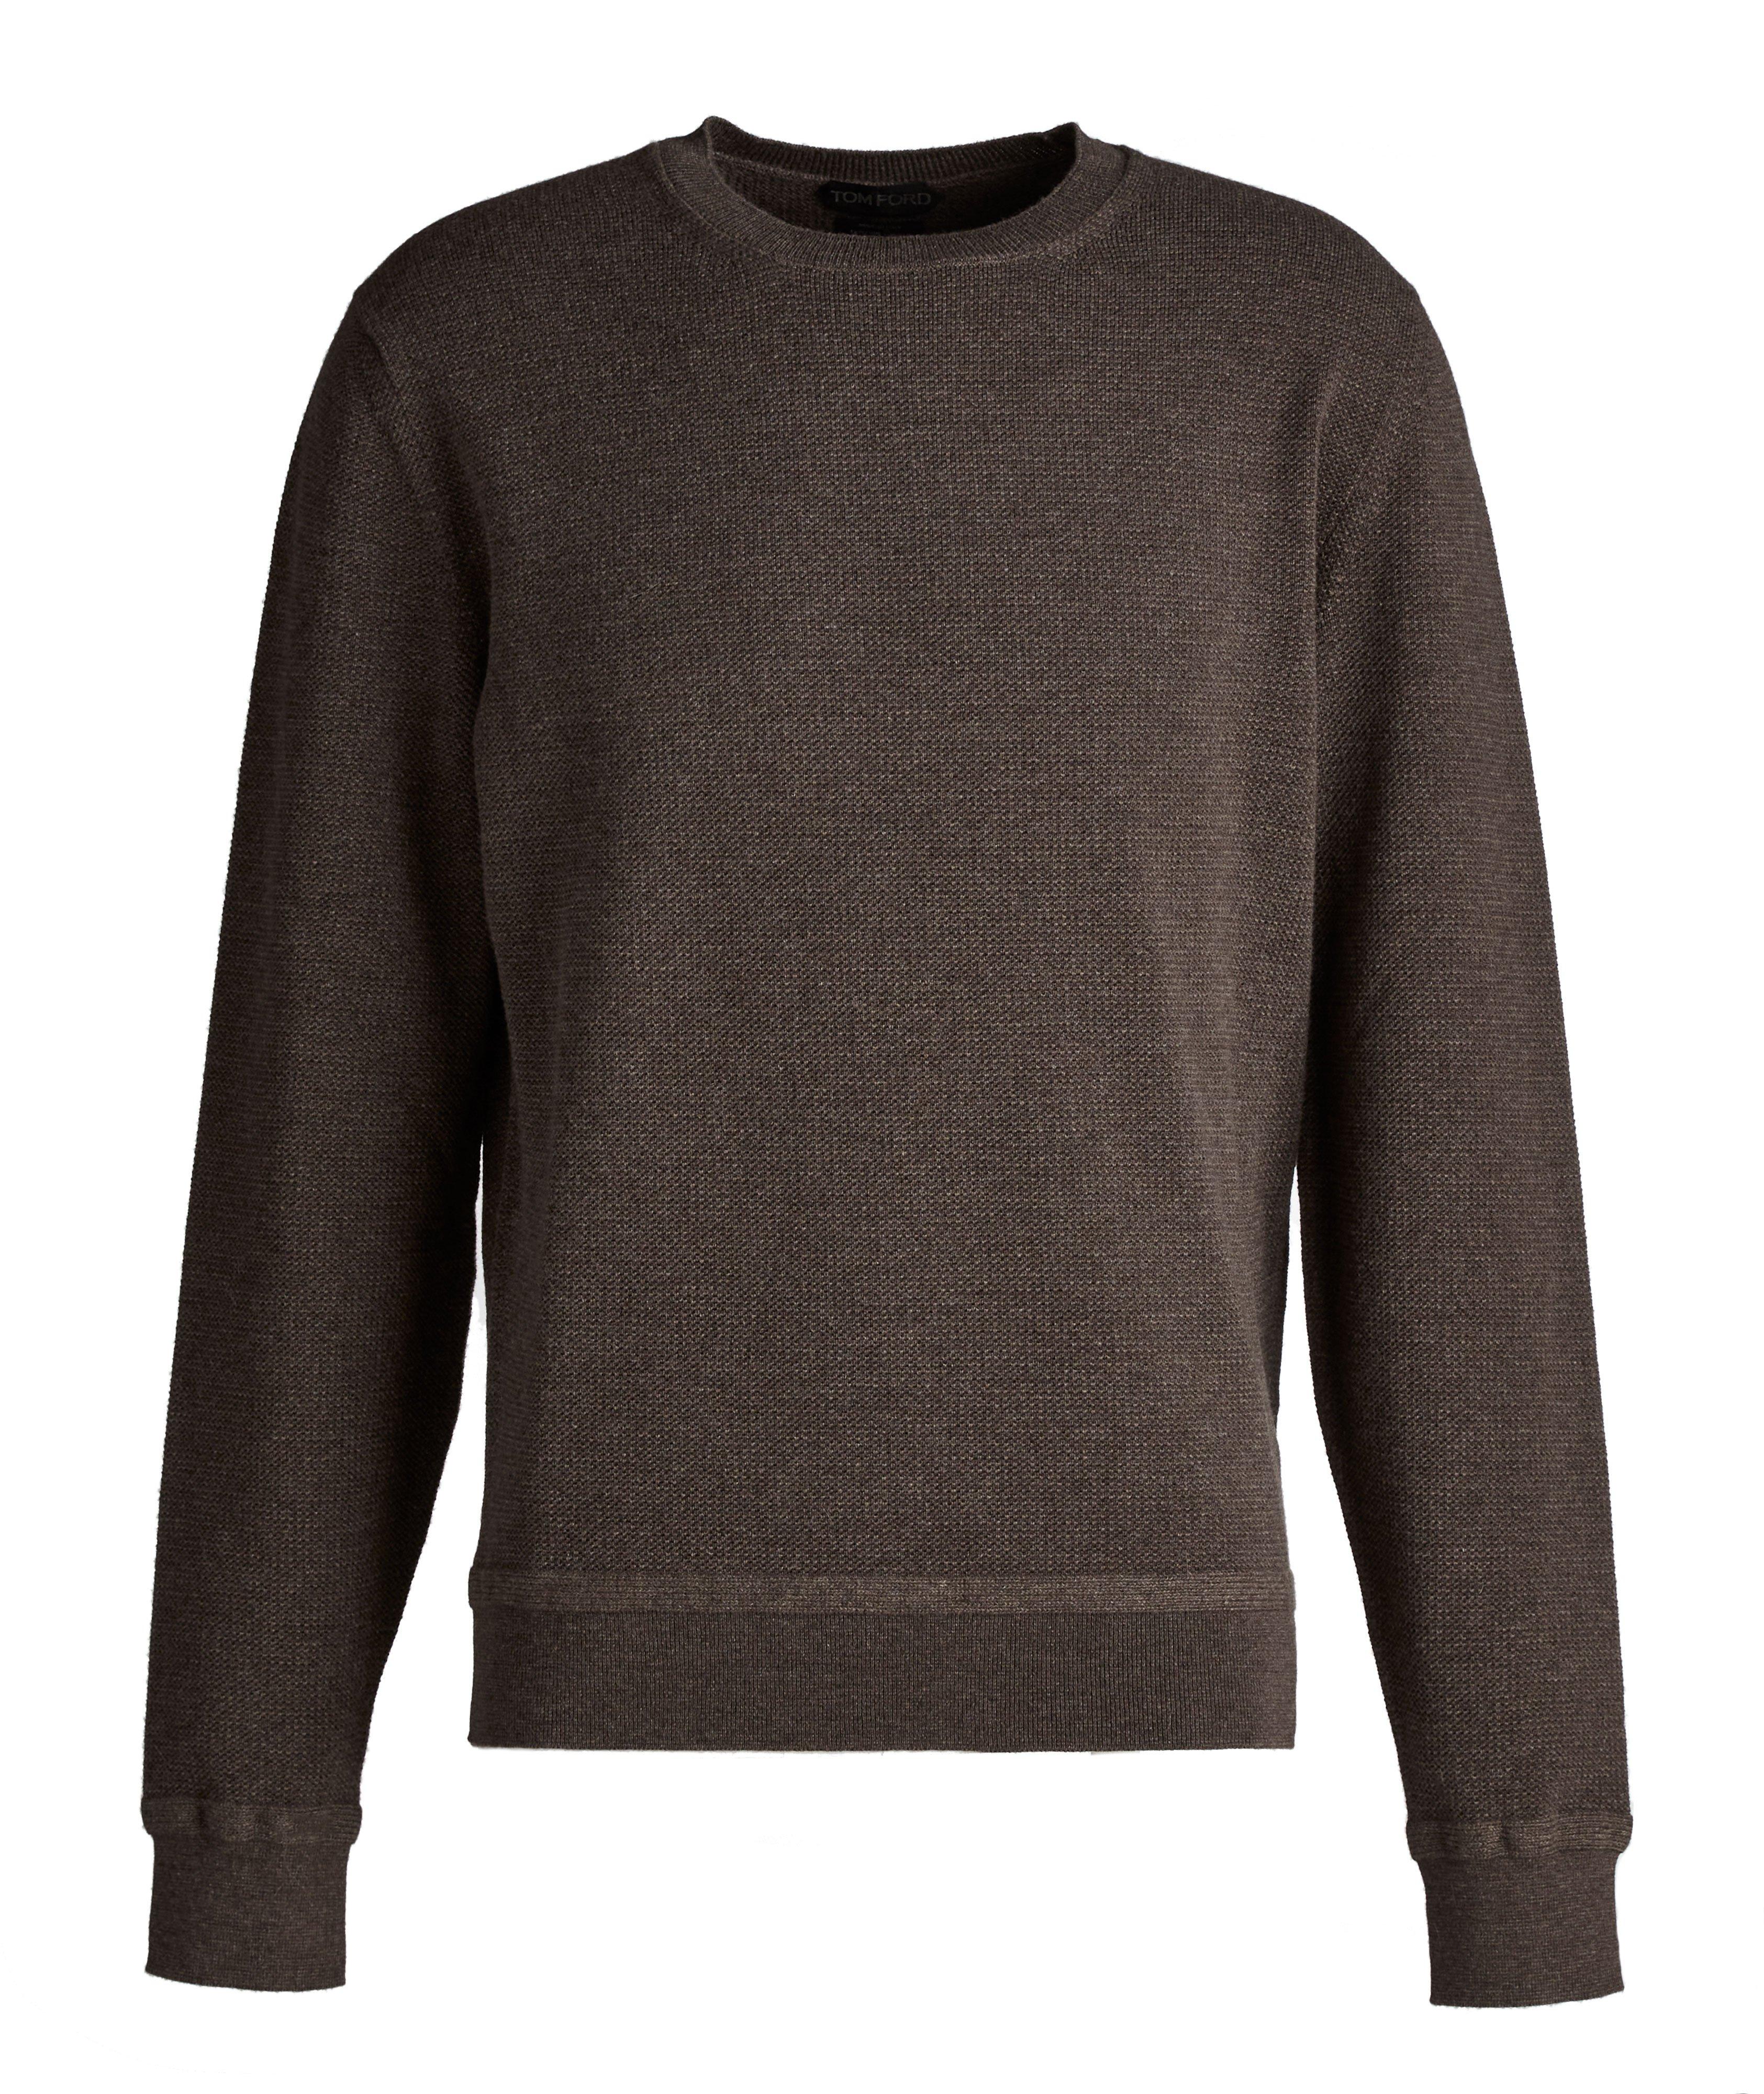 Cashmere-Wool Sweater image 0